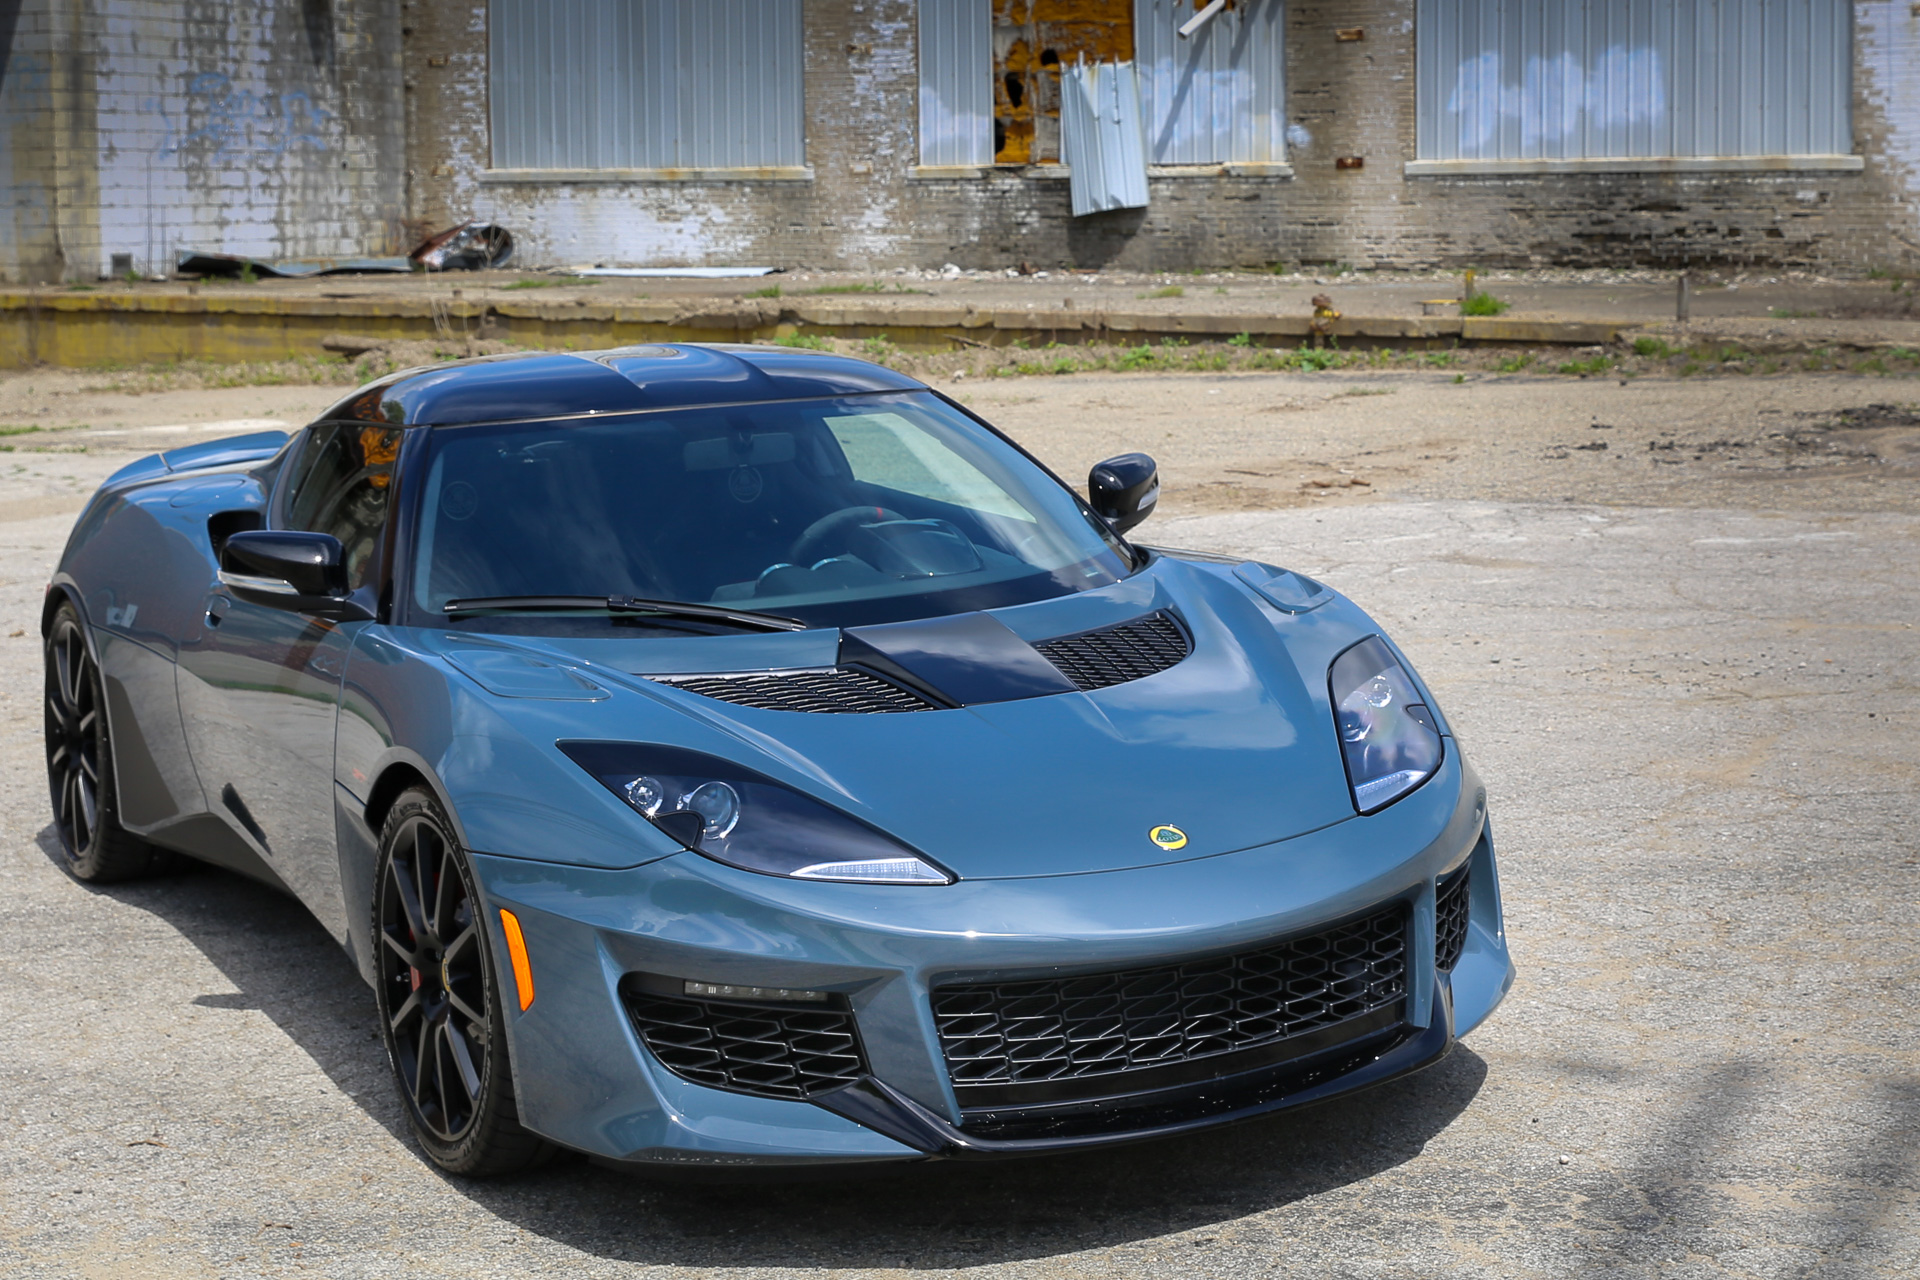 2020 Lotus Evora GT Review: A thrilling, analog weekend racer | TechCrunch